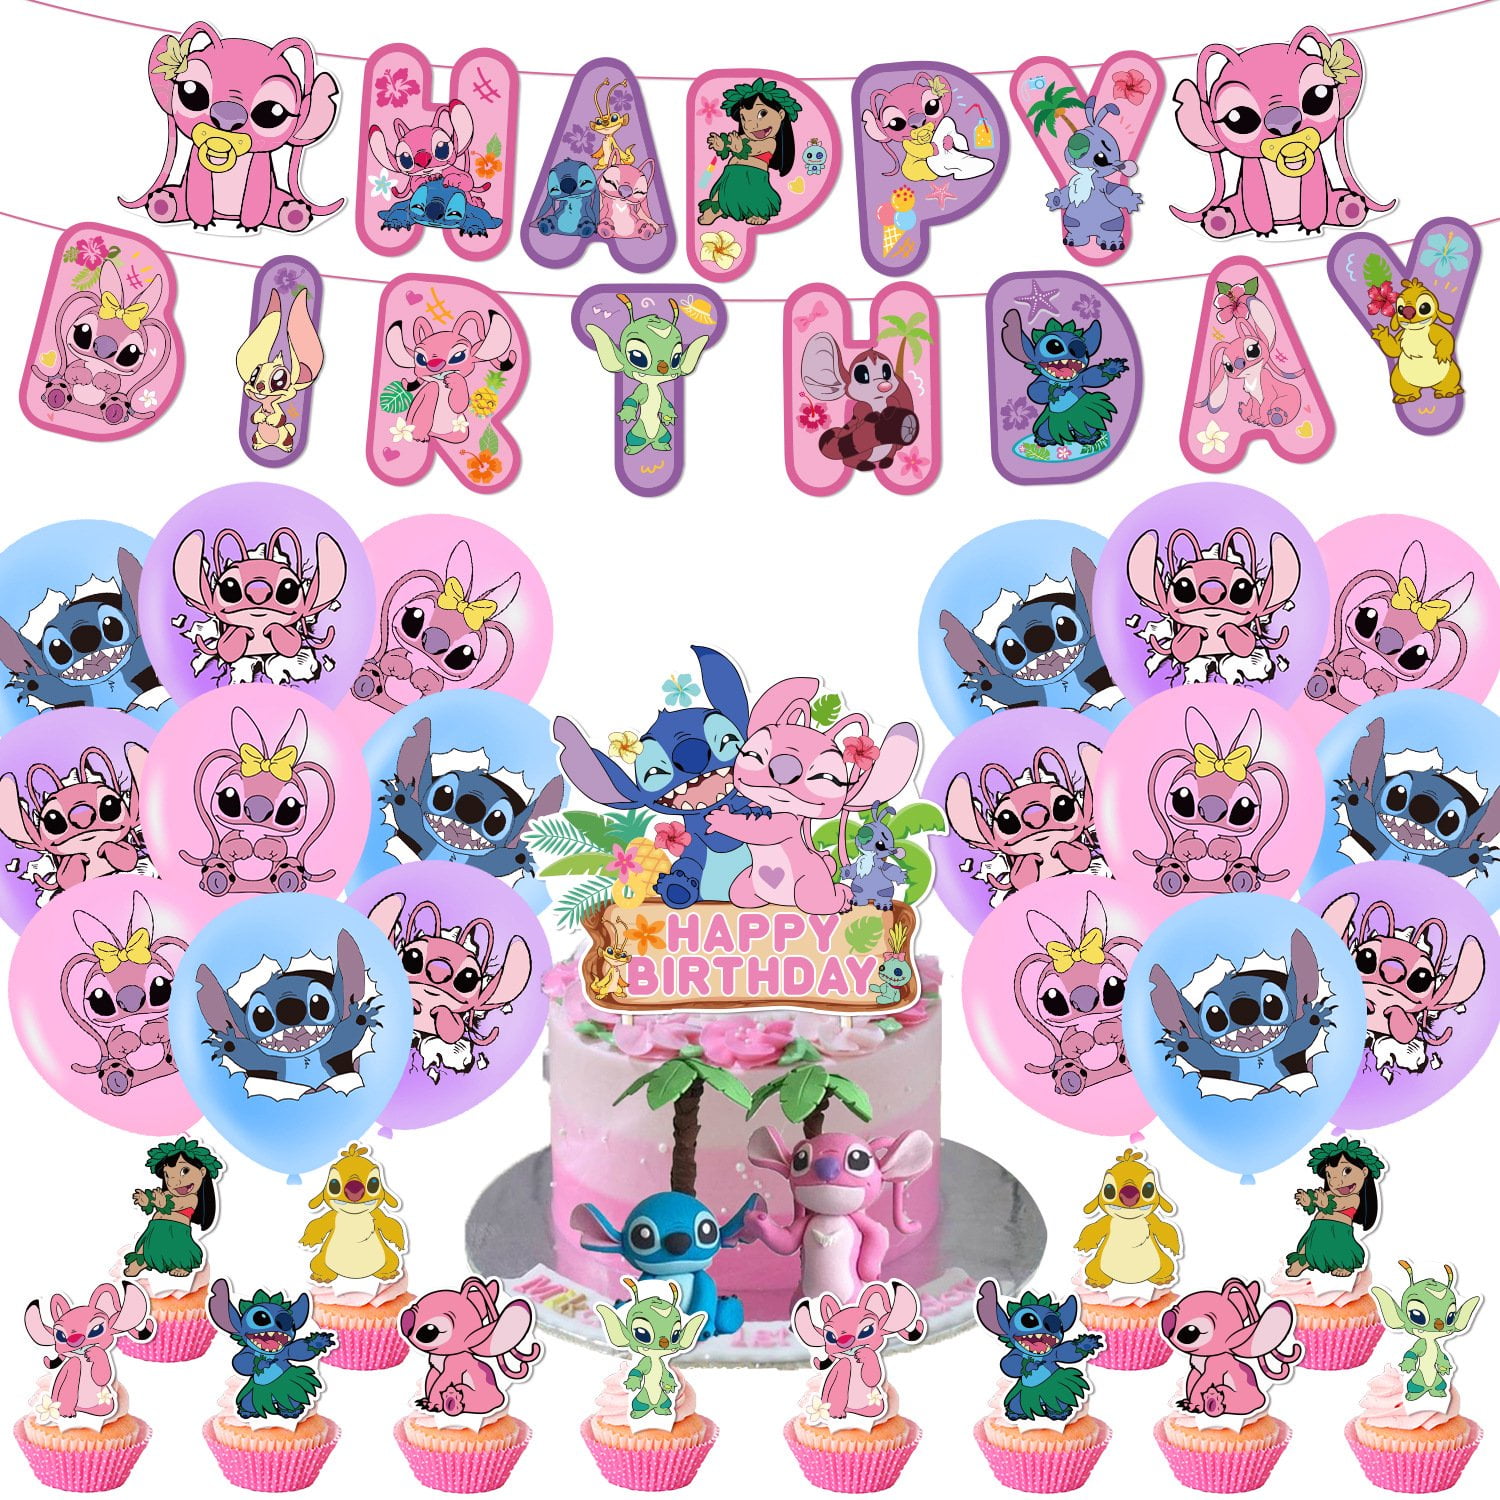 tmroo 102PCS Stitch Party Supplies, Include Banner, Cake Topper, Balloons,  Hanging Swirls for Stitch Party Decorations